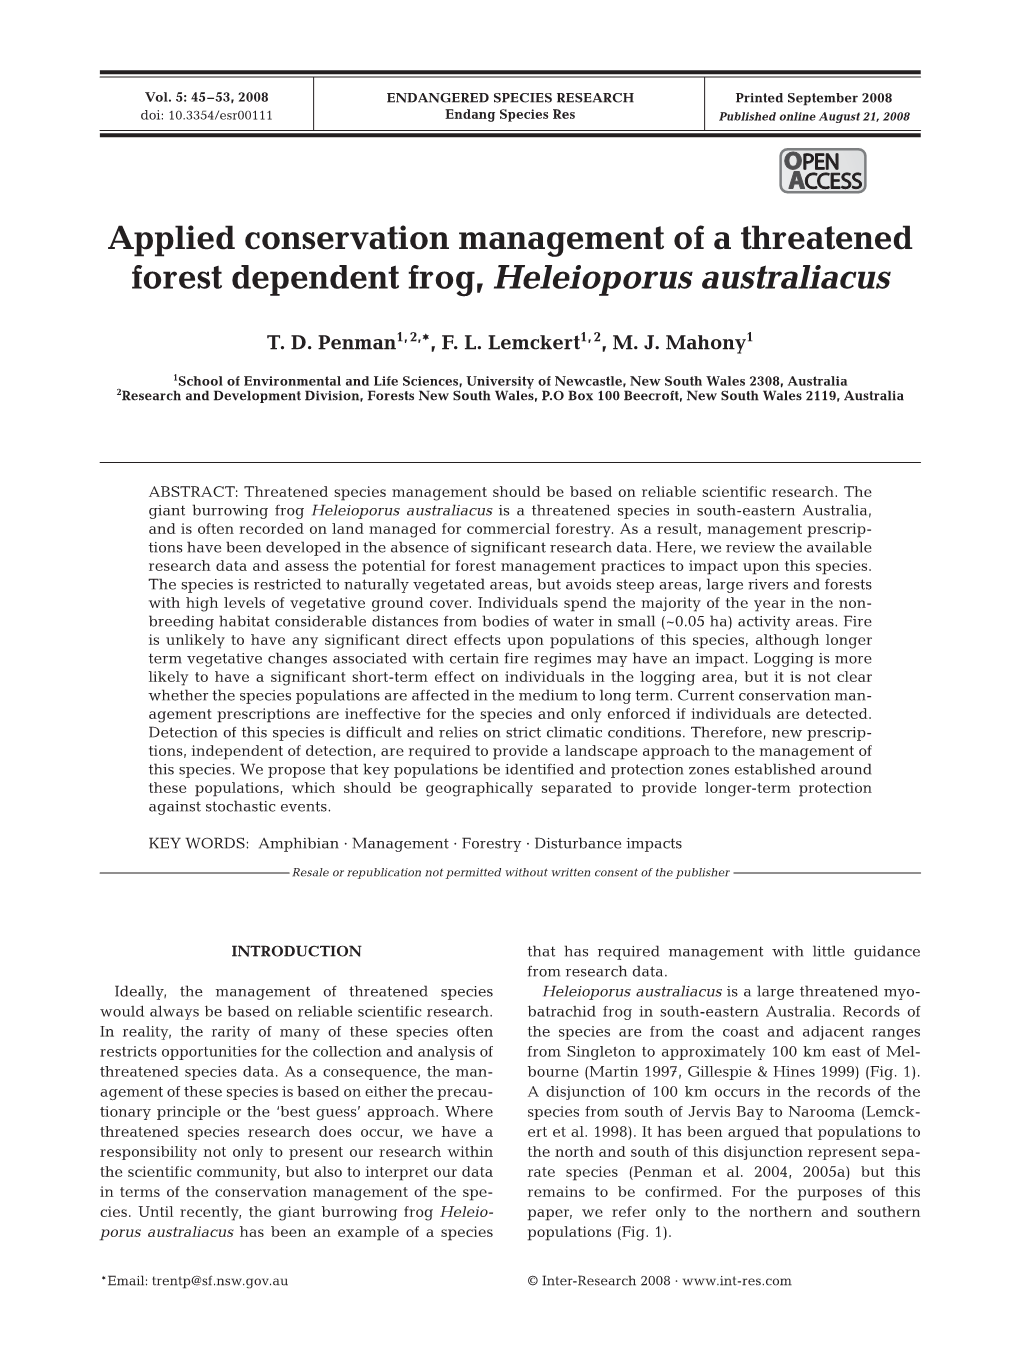 Applied Conservation Management of a Threatened Forest Dependent Frog, Heleioporus Australiacus